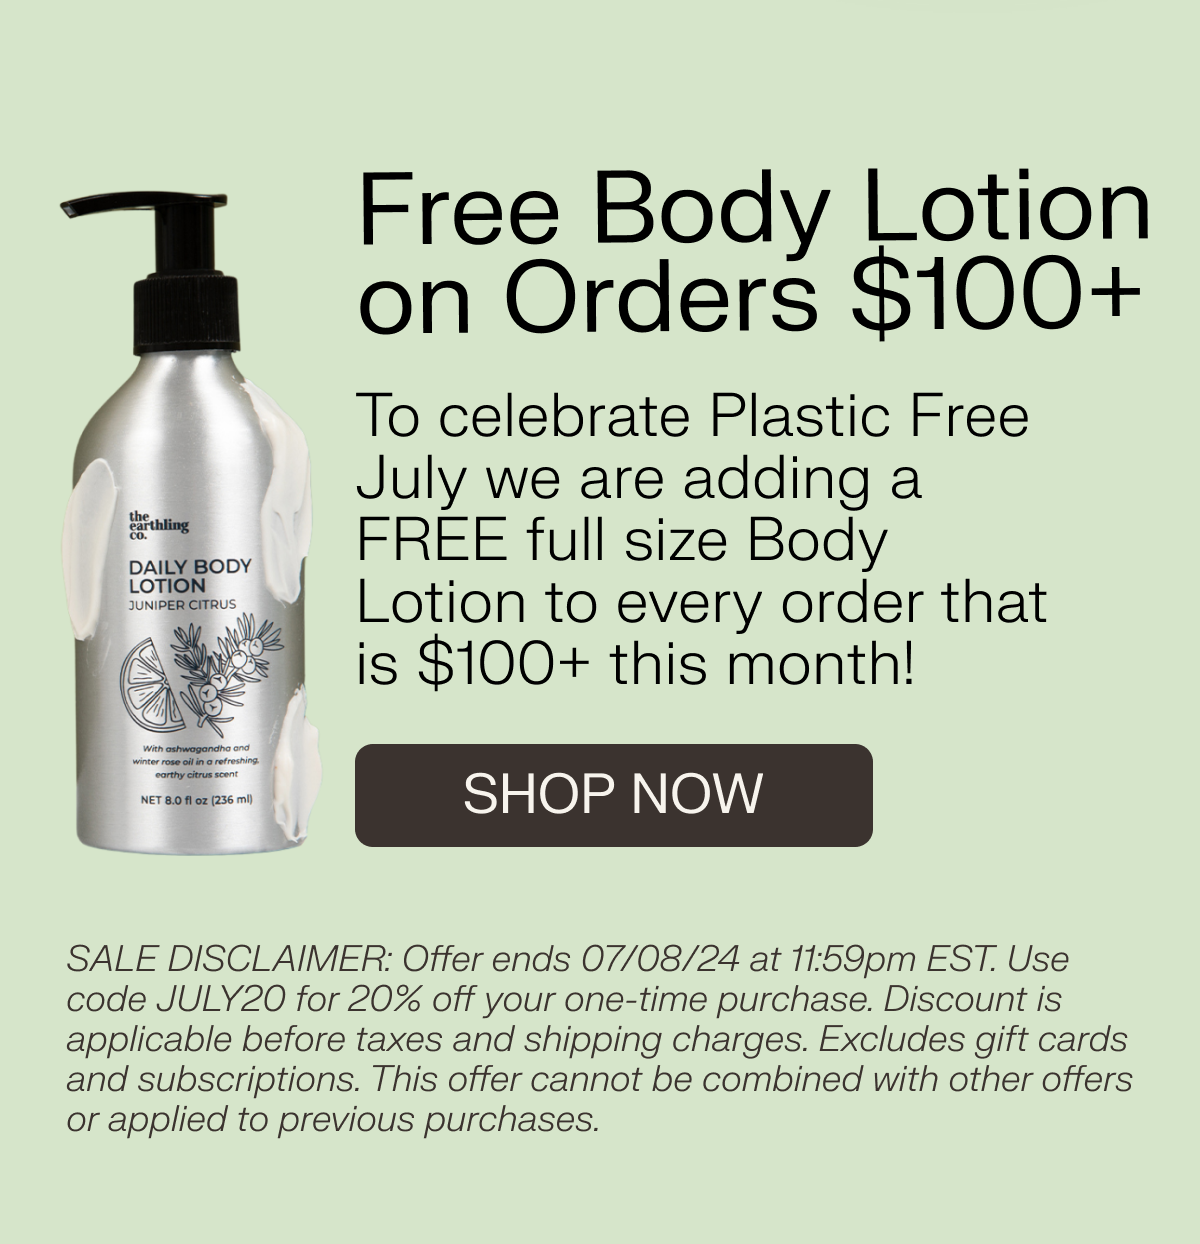 Free body lotion on orders \\$100+